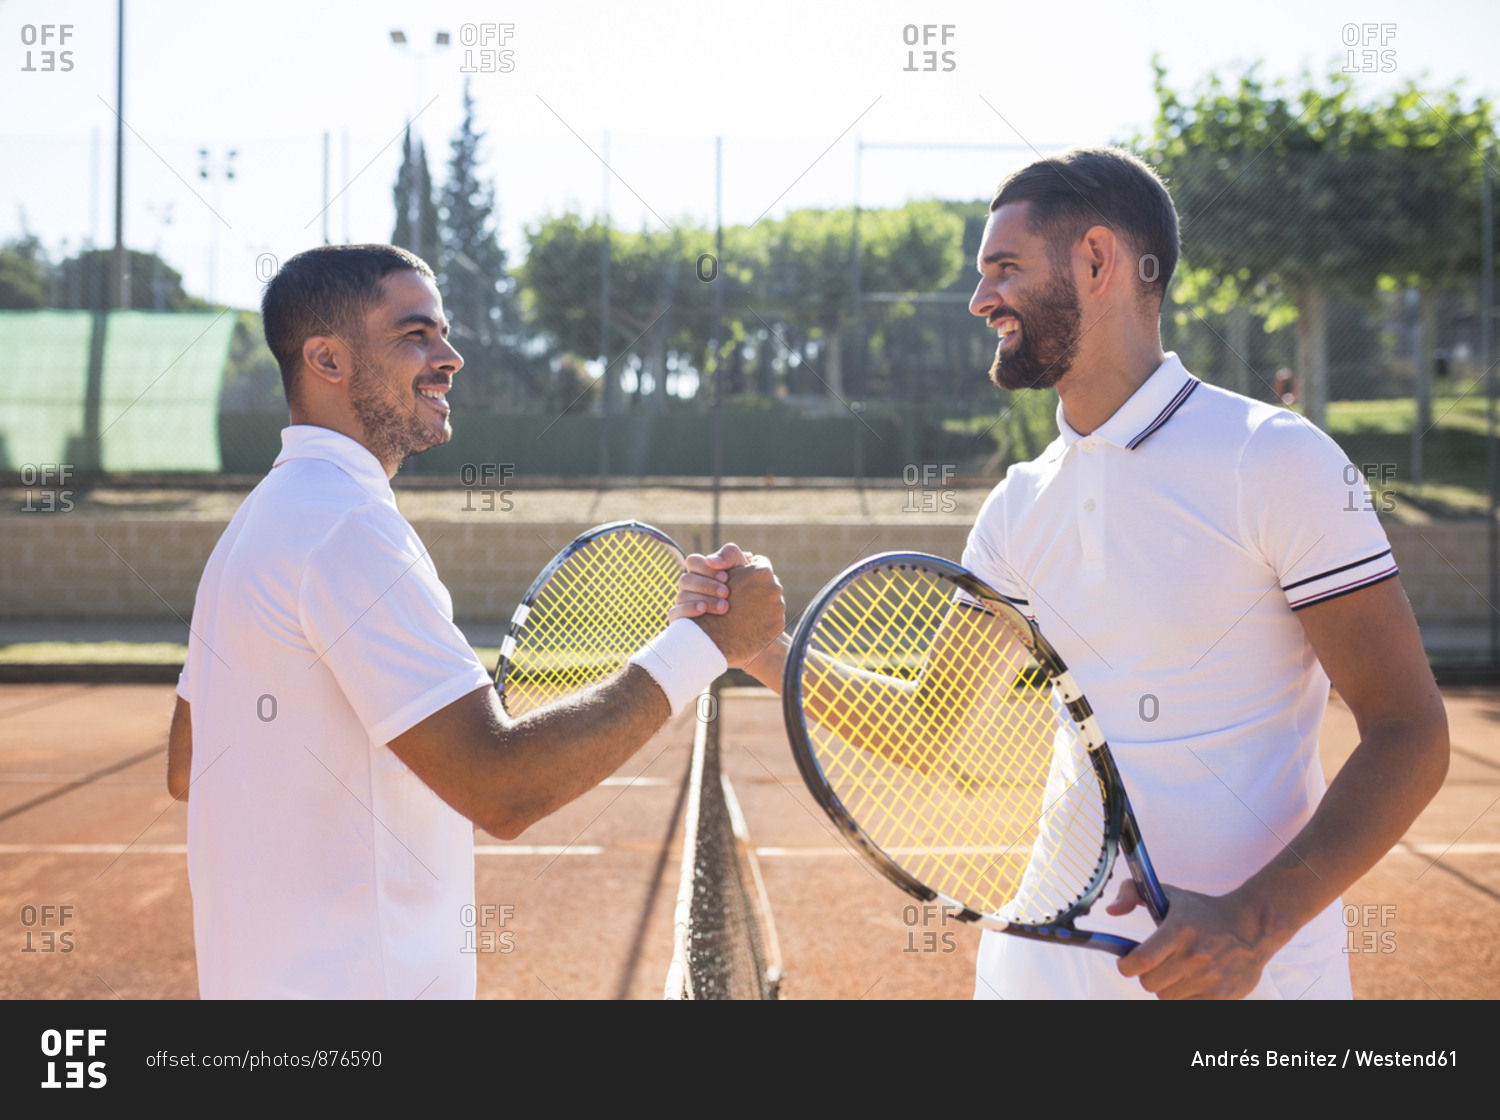 Side view of two tennis players with rackets shaking hands and smiling before tennis match